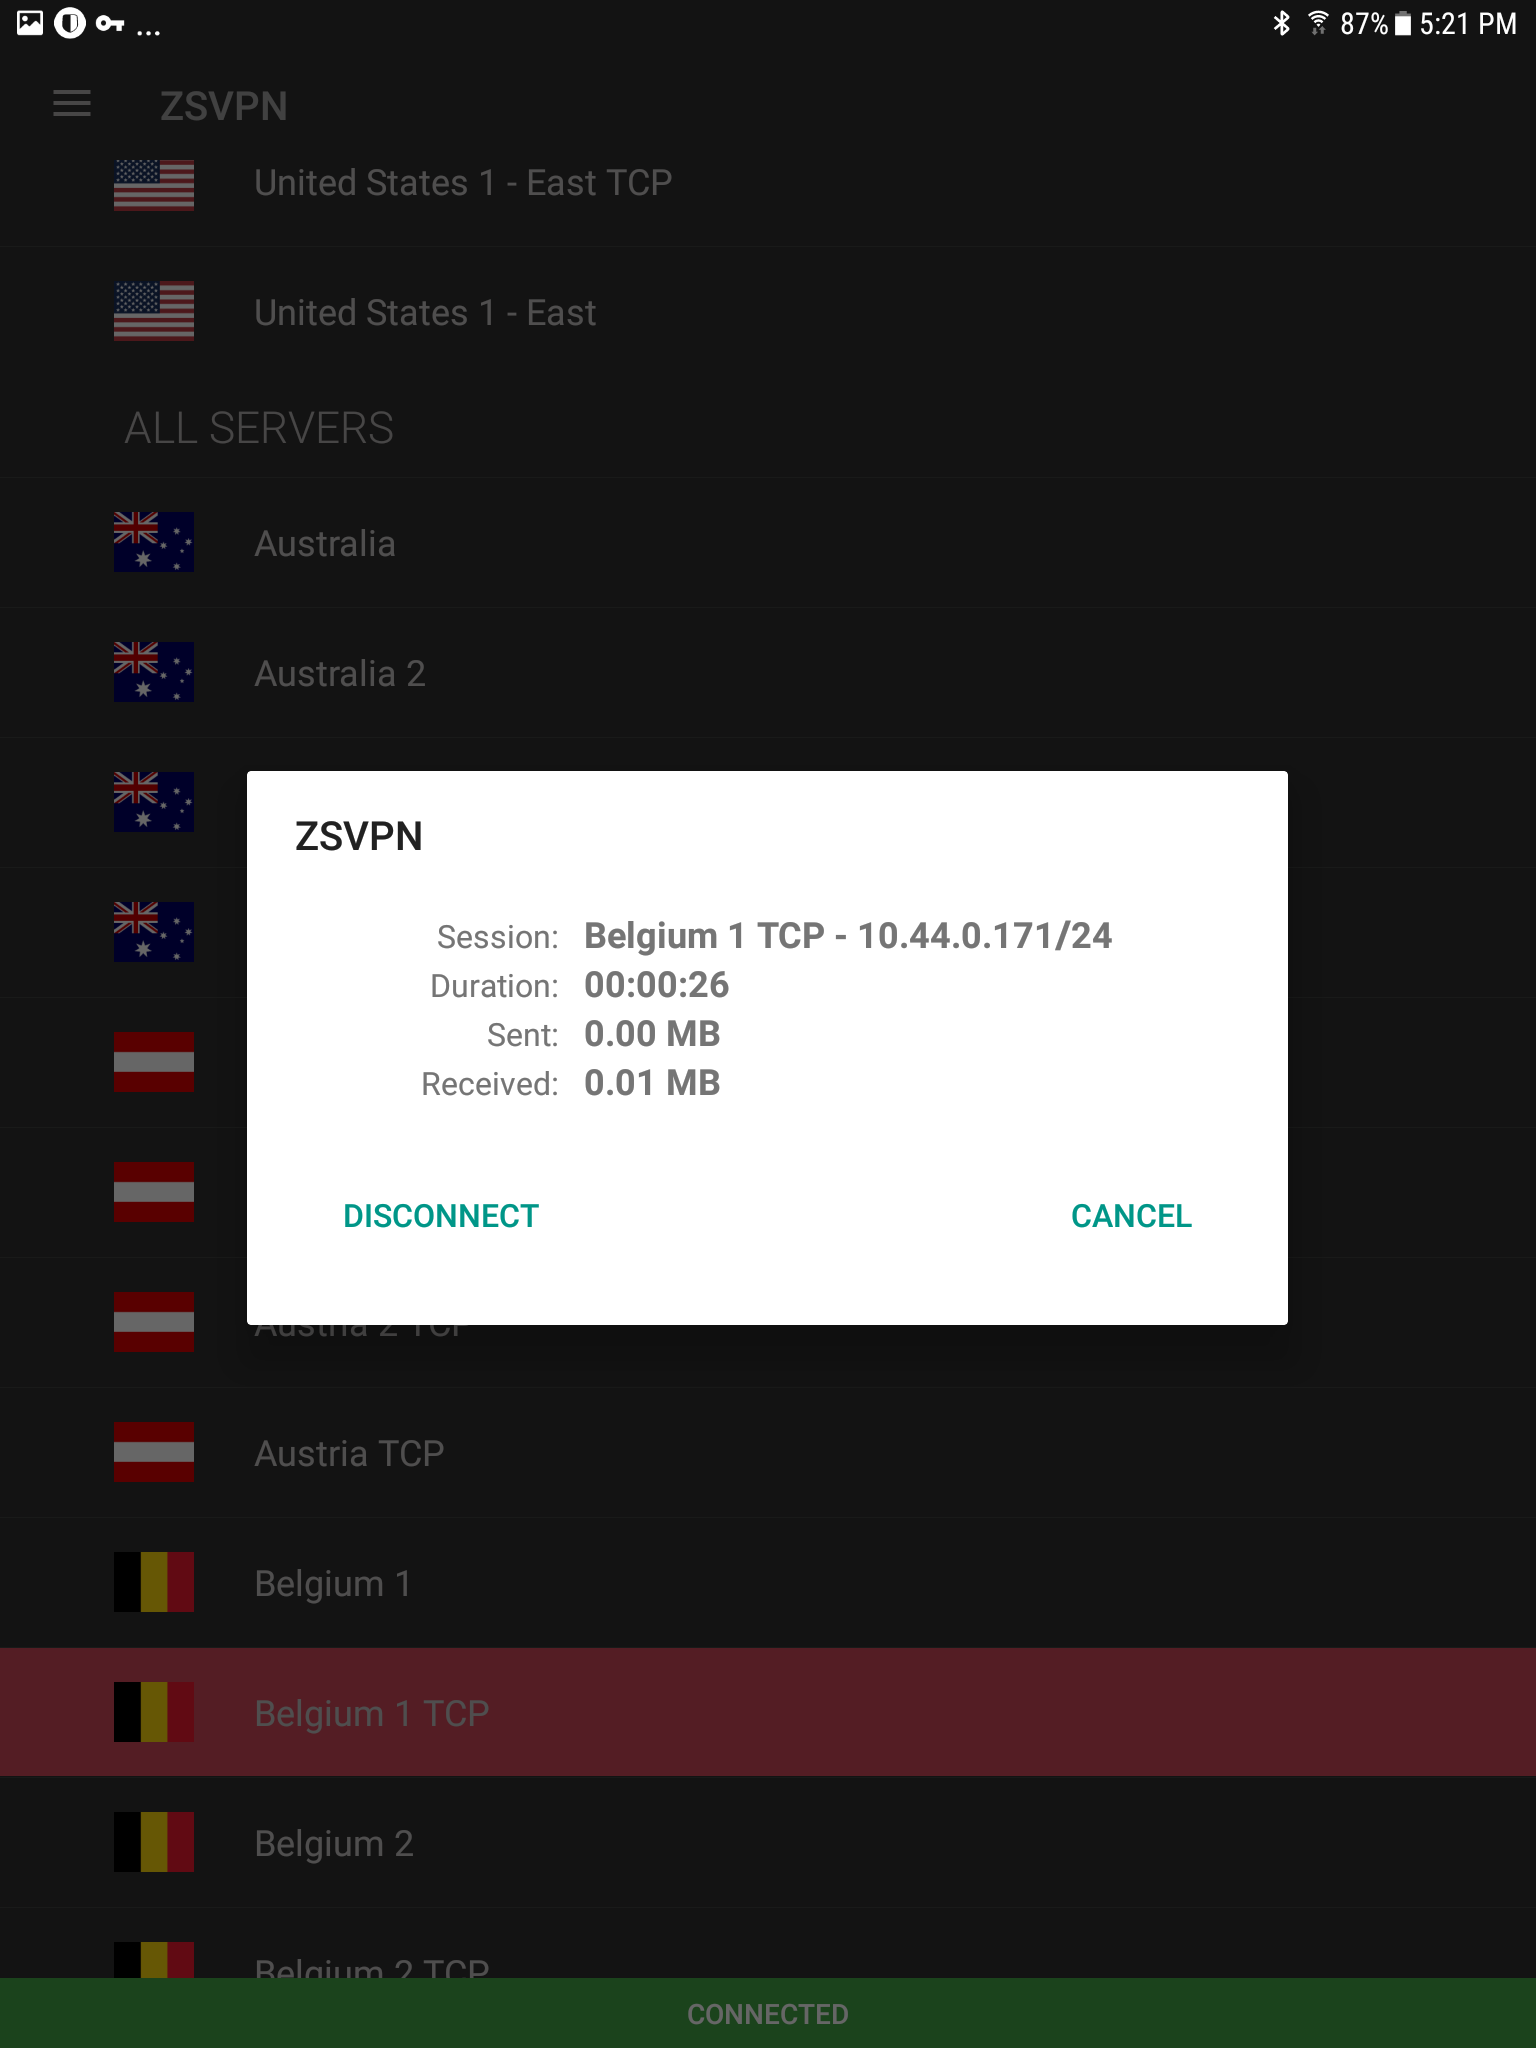 ZSVPN | Android App Review | Server Connection and Verification | GiveMeApps